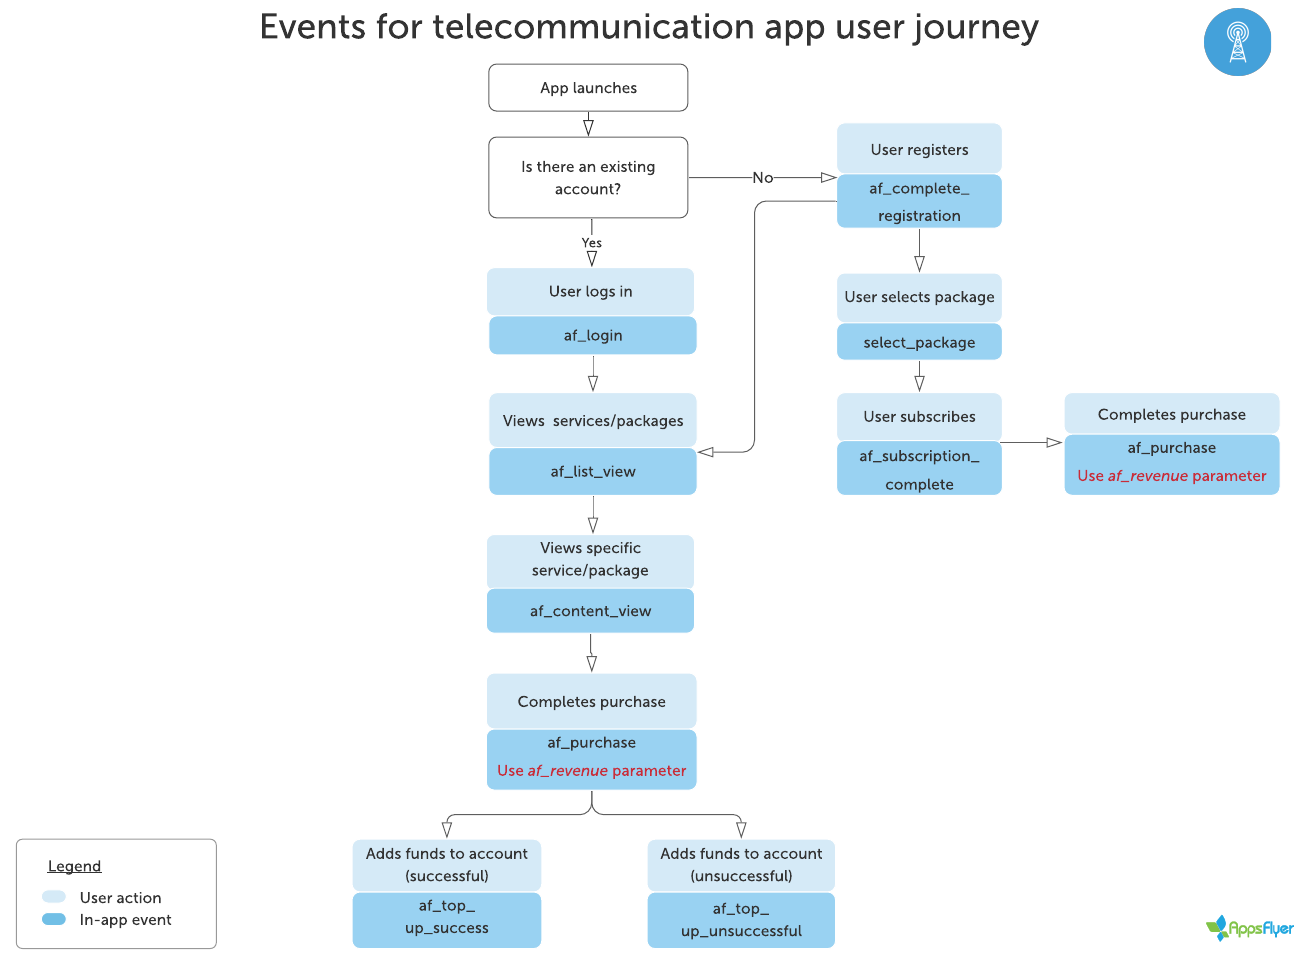 Flowchart_for_recommended_events_telecommunication_app_user_journey